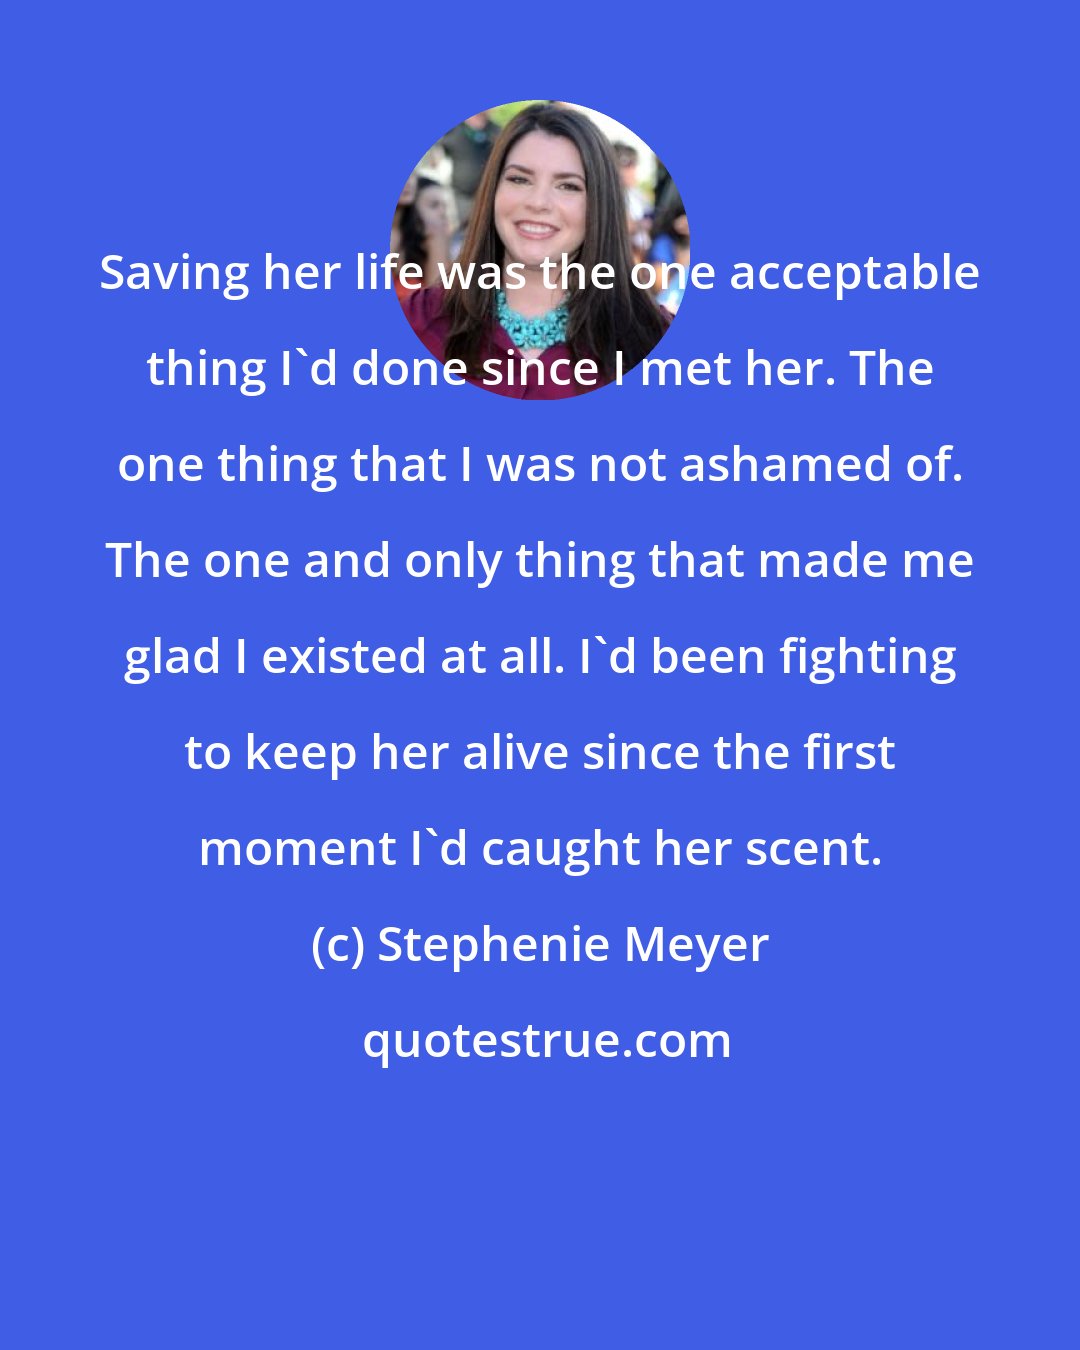 Stephenie Meyer: Saving her life was the one acceptable thing I'd done since I met her. The one thing that I was not ashamed of. The one and only thing that made me glad I existed at all. I'd been fighting to keep her alive since the first moment I'd caught her scent.